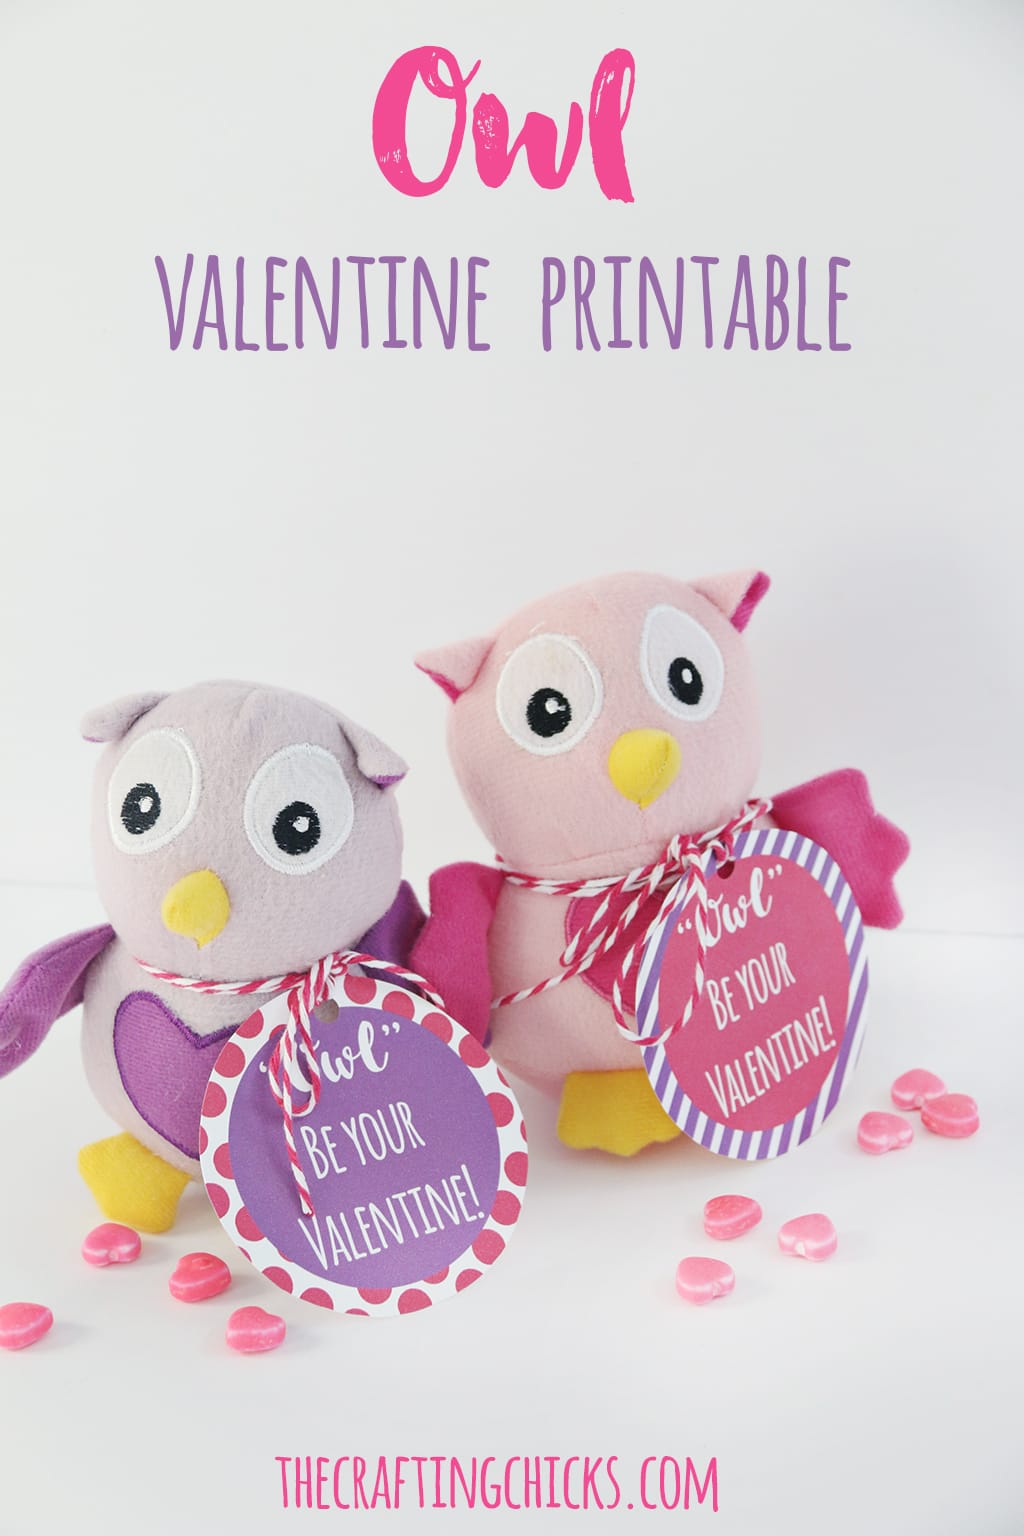 Owl Valentine Printable - A simple non candy class Valentine